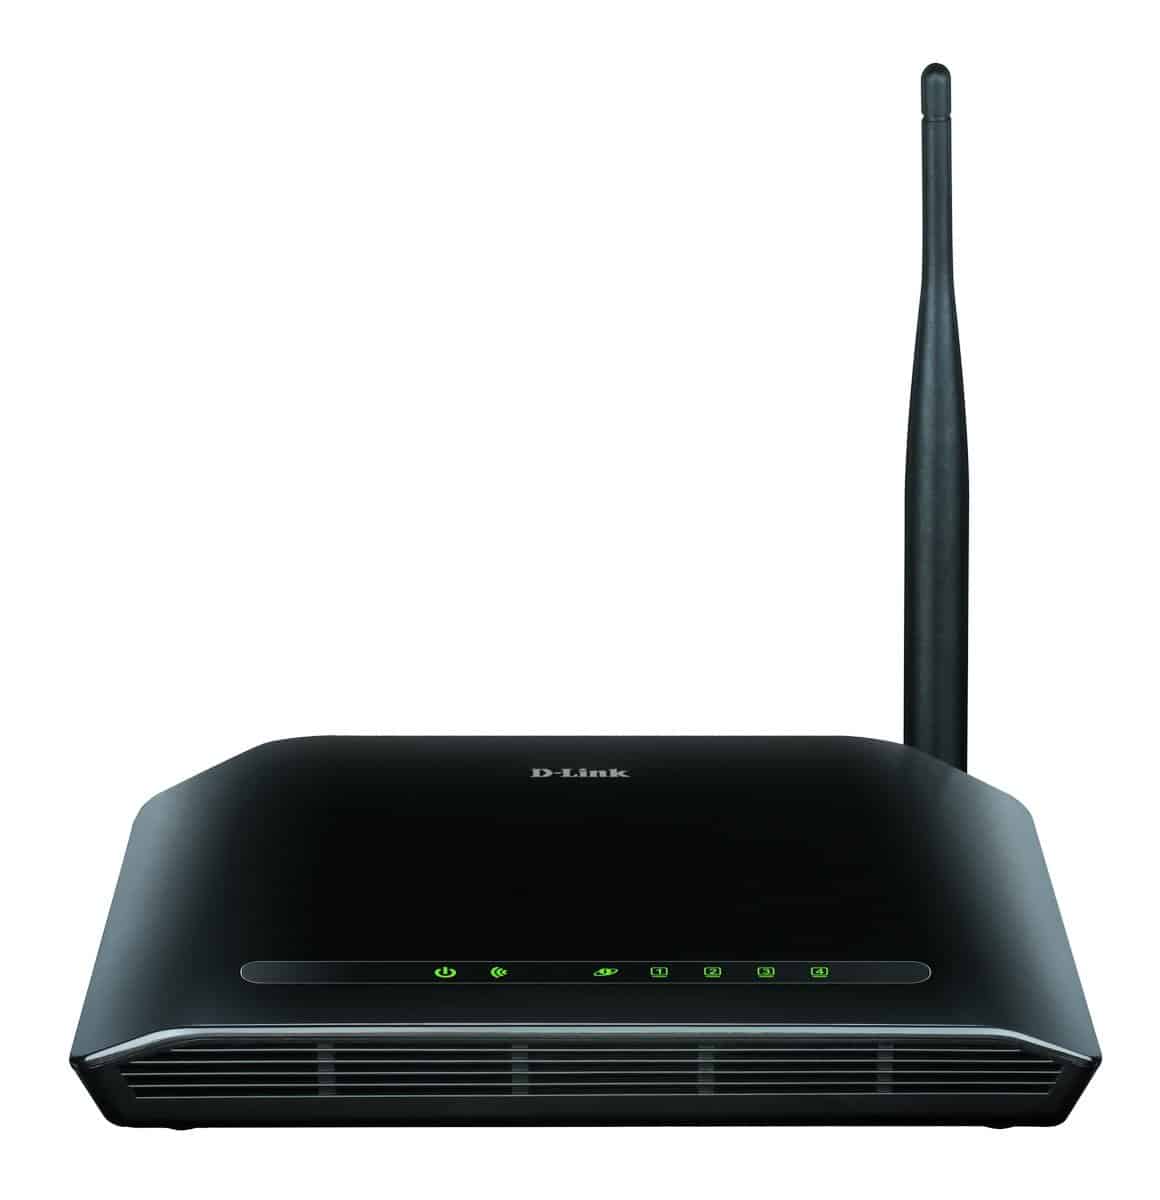 Best Budget WiFi Routers in India with Good Range for Home & Office Use